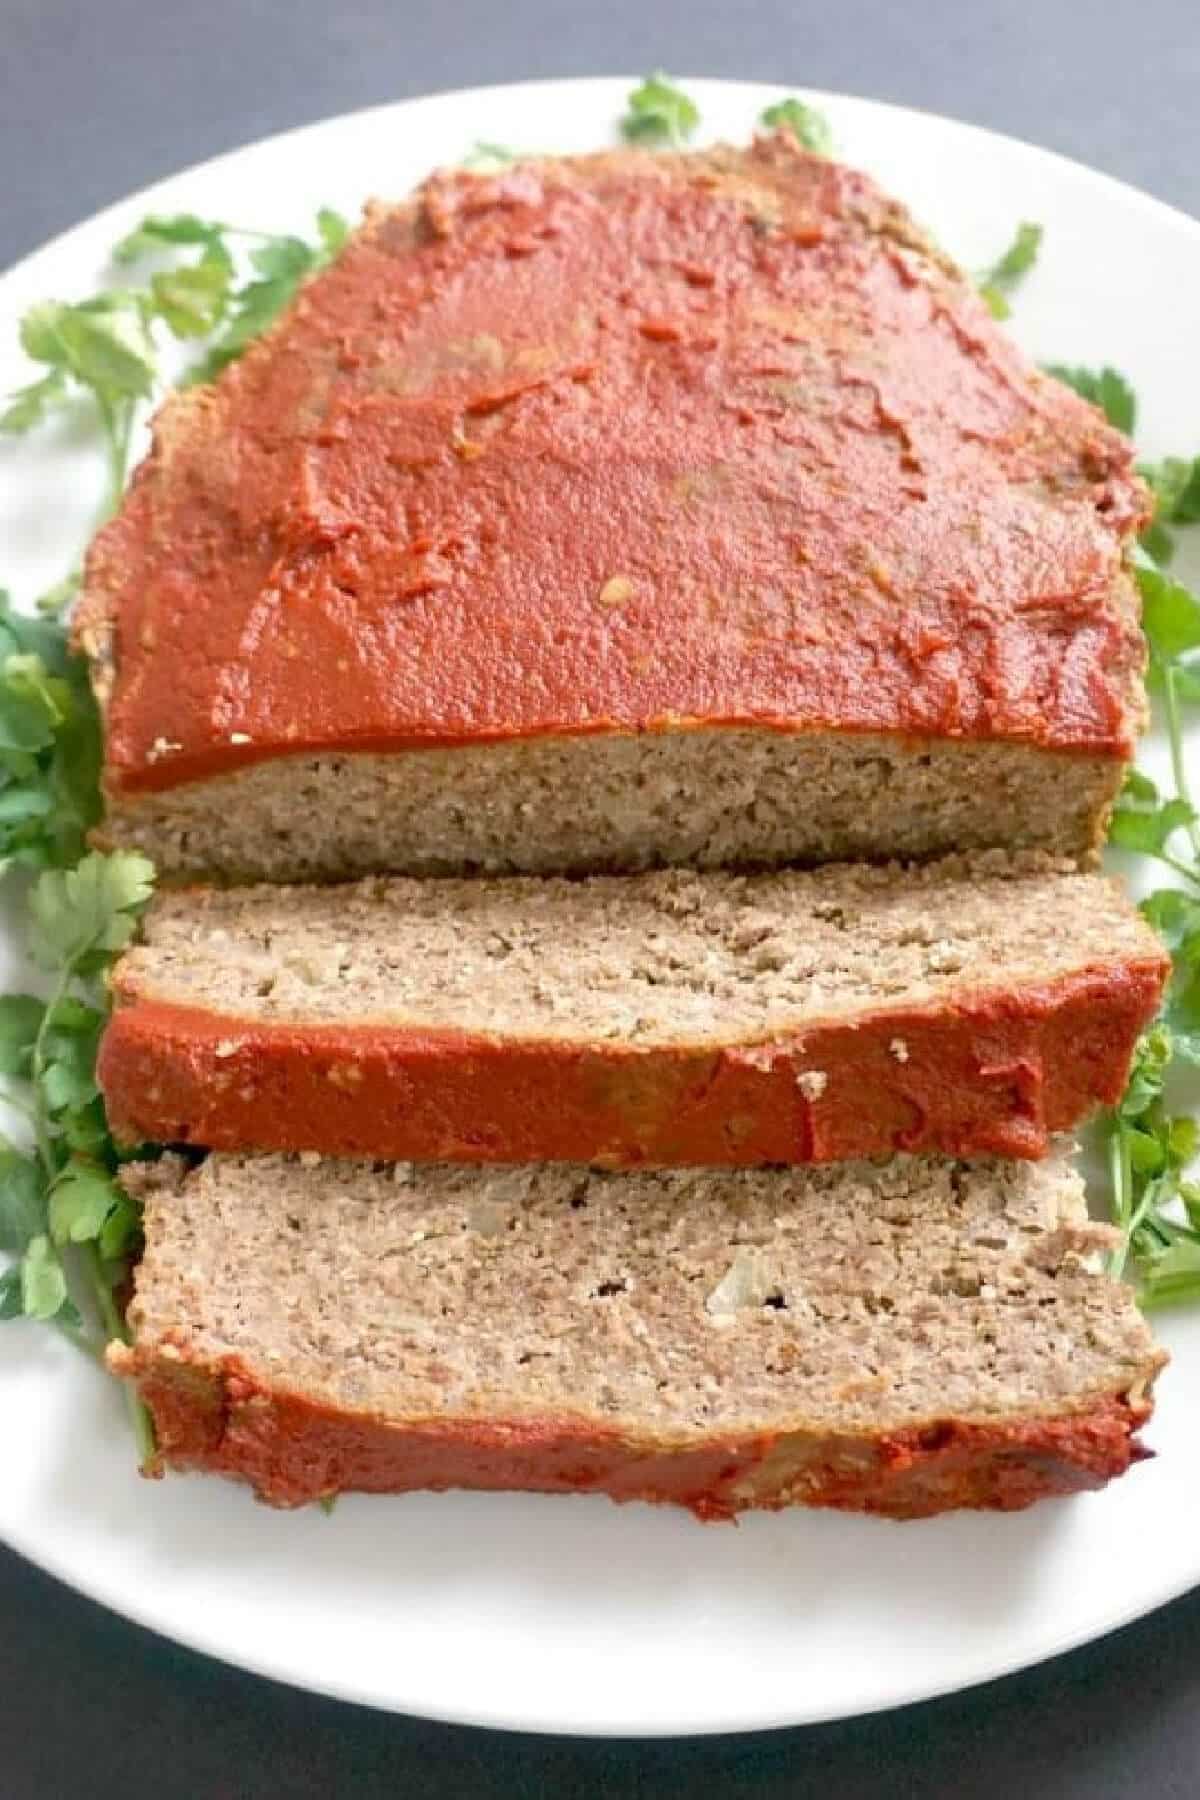 A sliced loaf meat on a white plate decorated with salad leaves